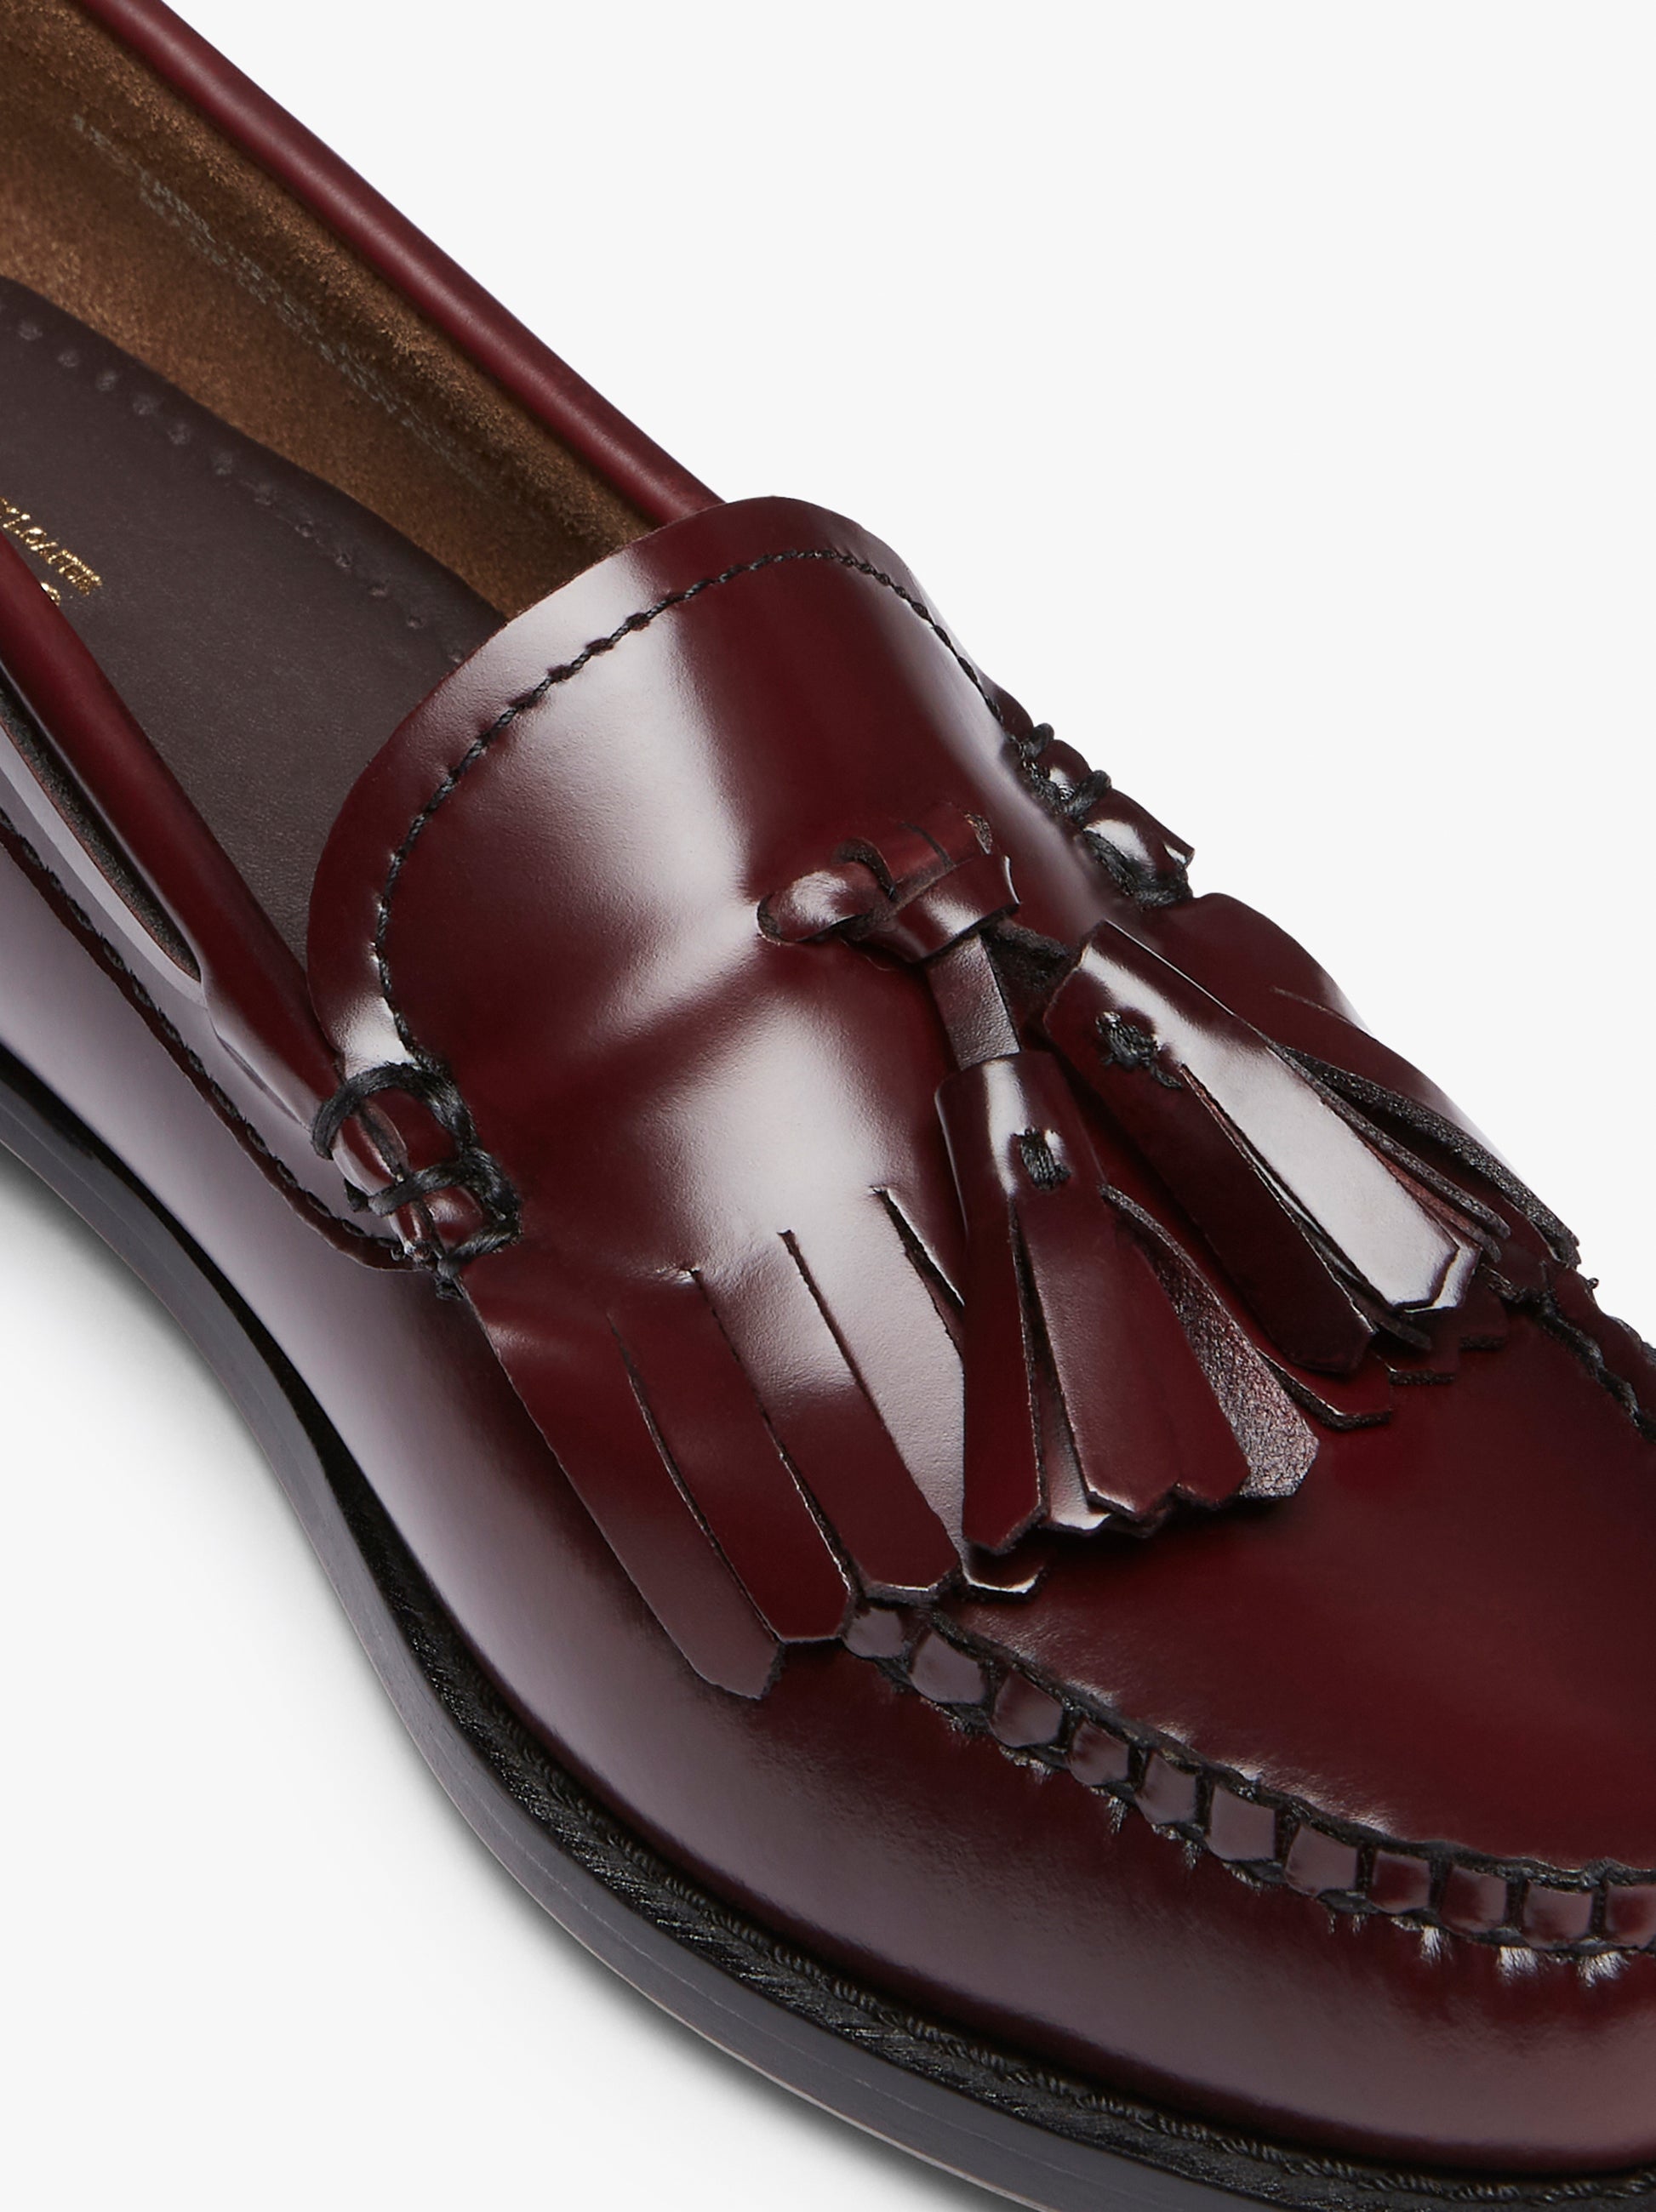 Wine Leather Tassel Loafers | Bass Weejuns Tassel Loafers – G.H.